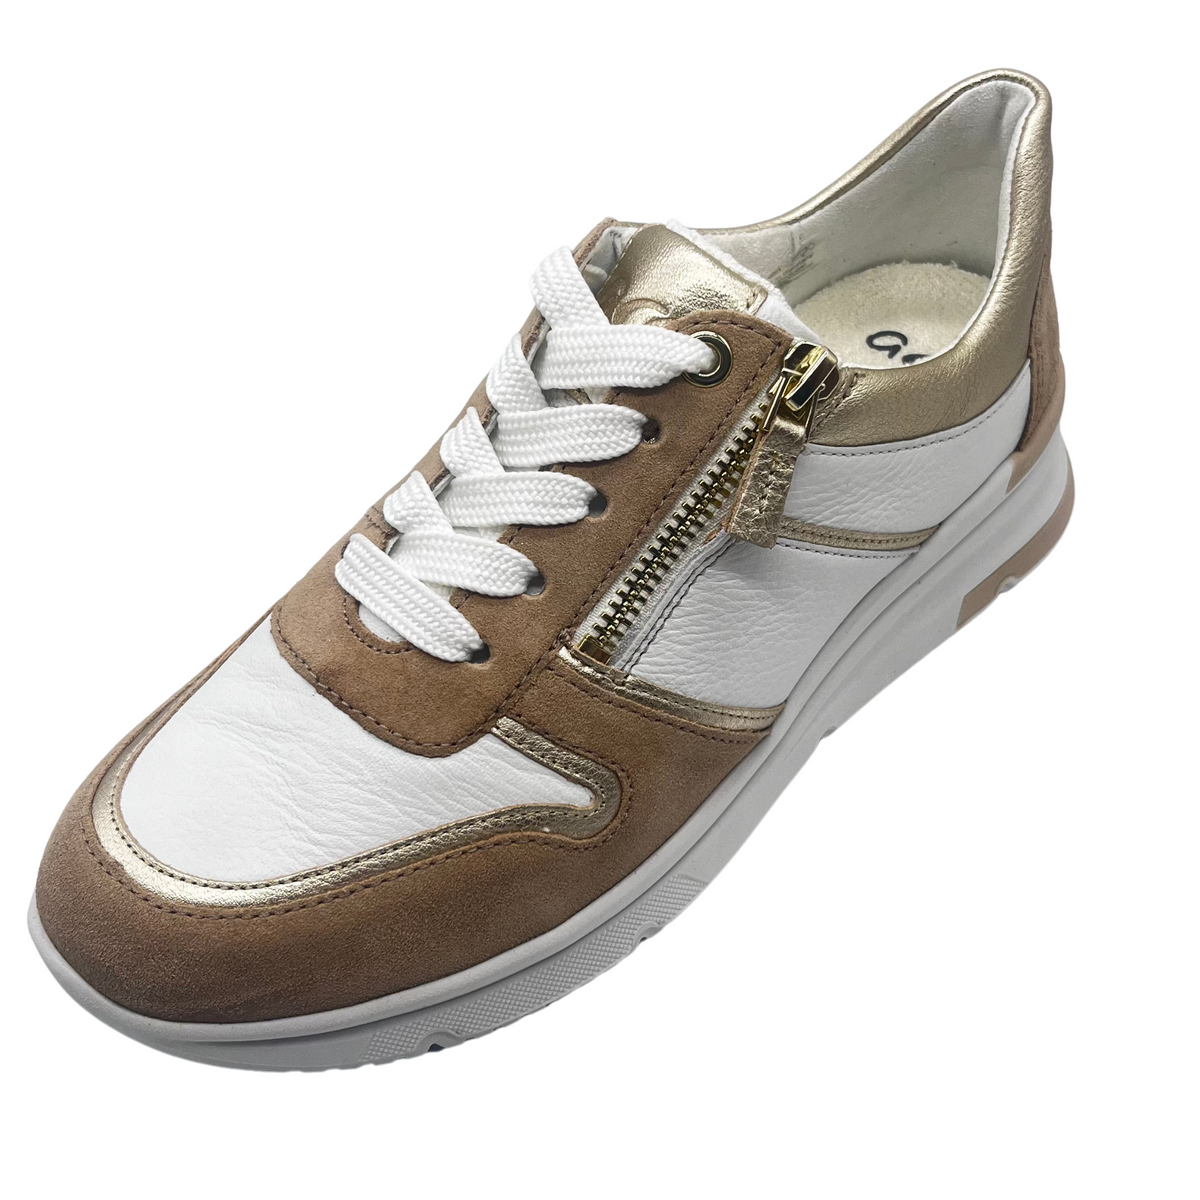 Ara White, Tan and Gold Trainers With Side Zip